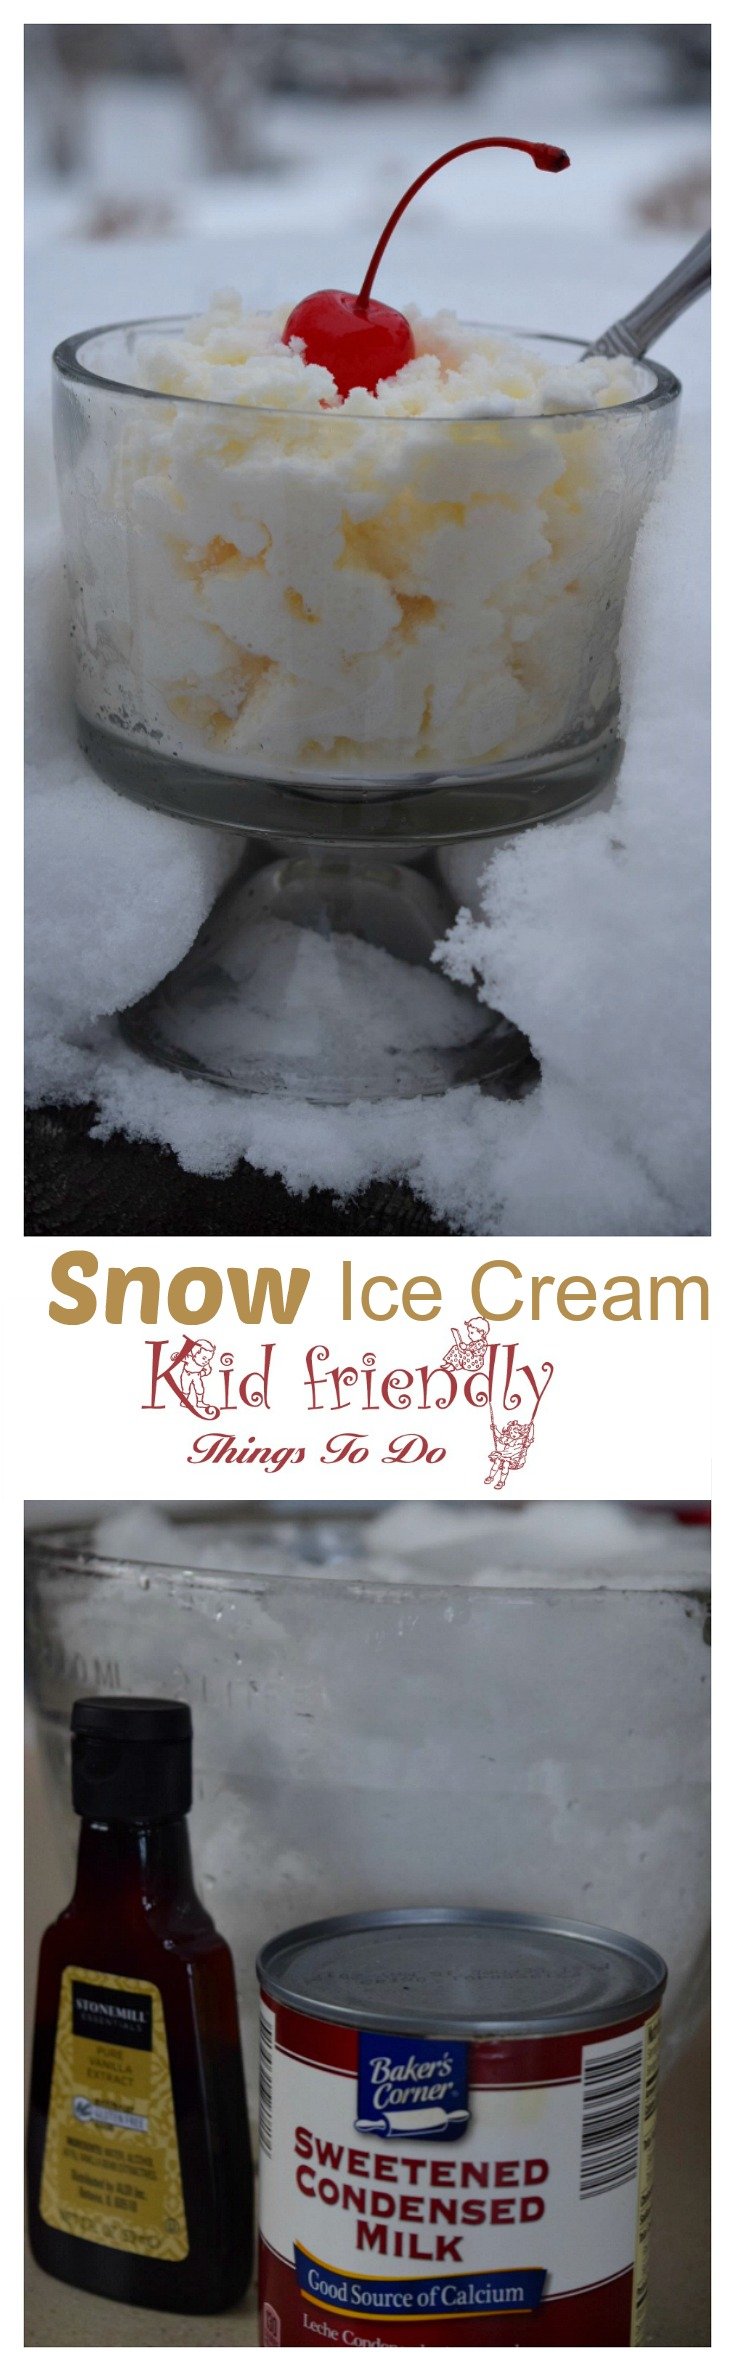 Simple and Delicious Three Ingredient Snow Ice Cream Recipe made with Sweetened Condensed Milk - This is so much fun to do with the kids and so easy to make. www.kidfriendlythingstodo.com